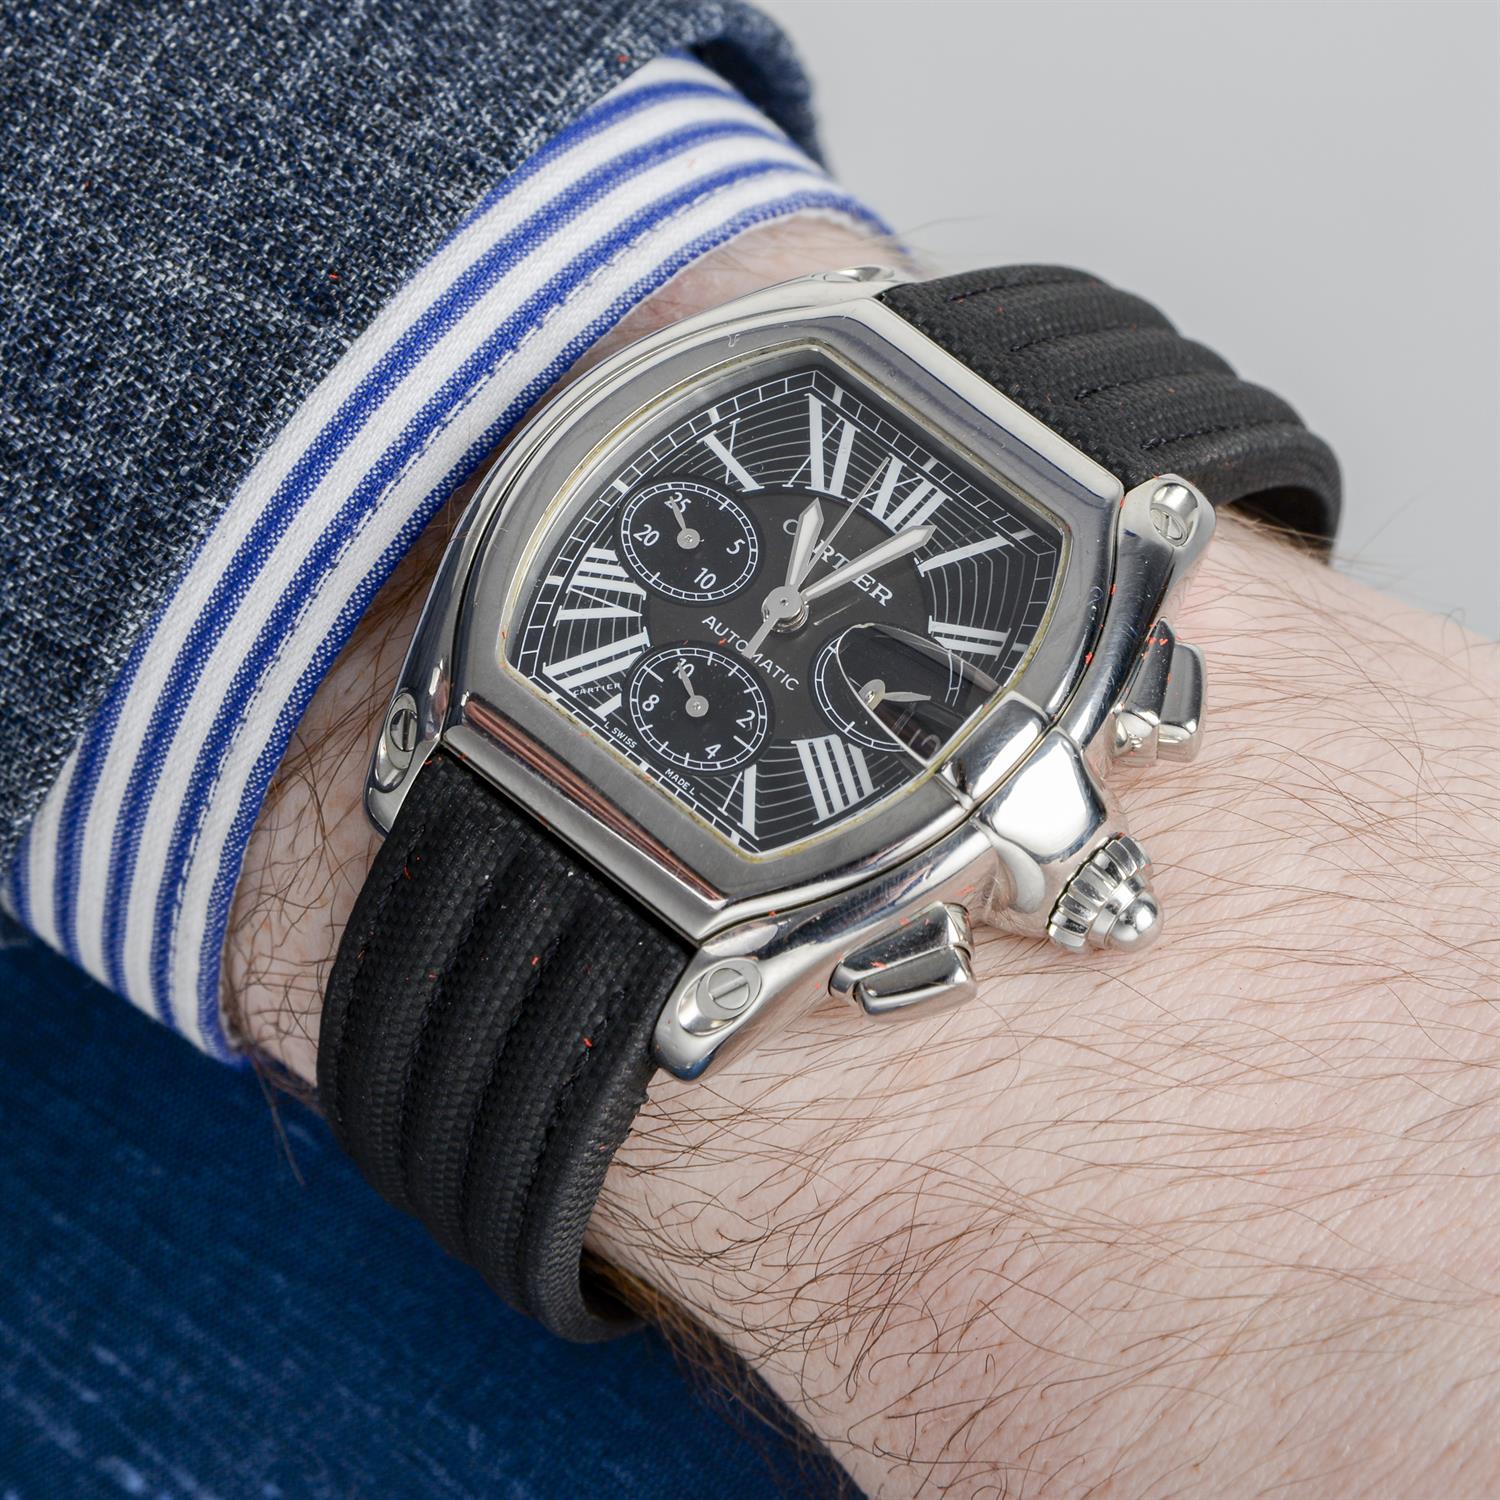 Cartier - a Roadster chronograph watch, 40mm. - Image 6 of 7